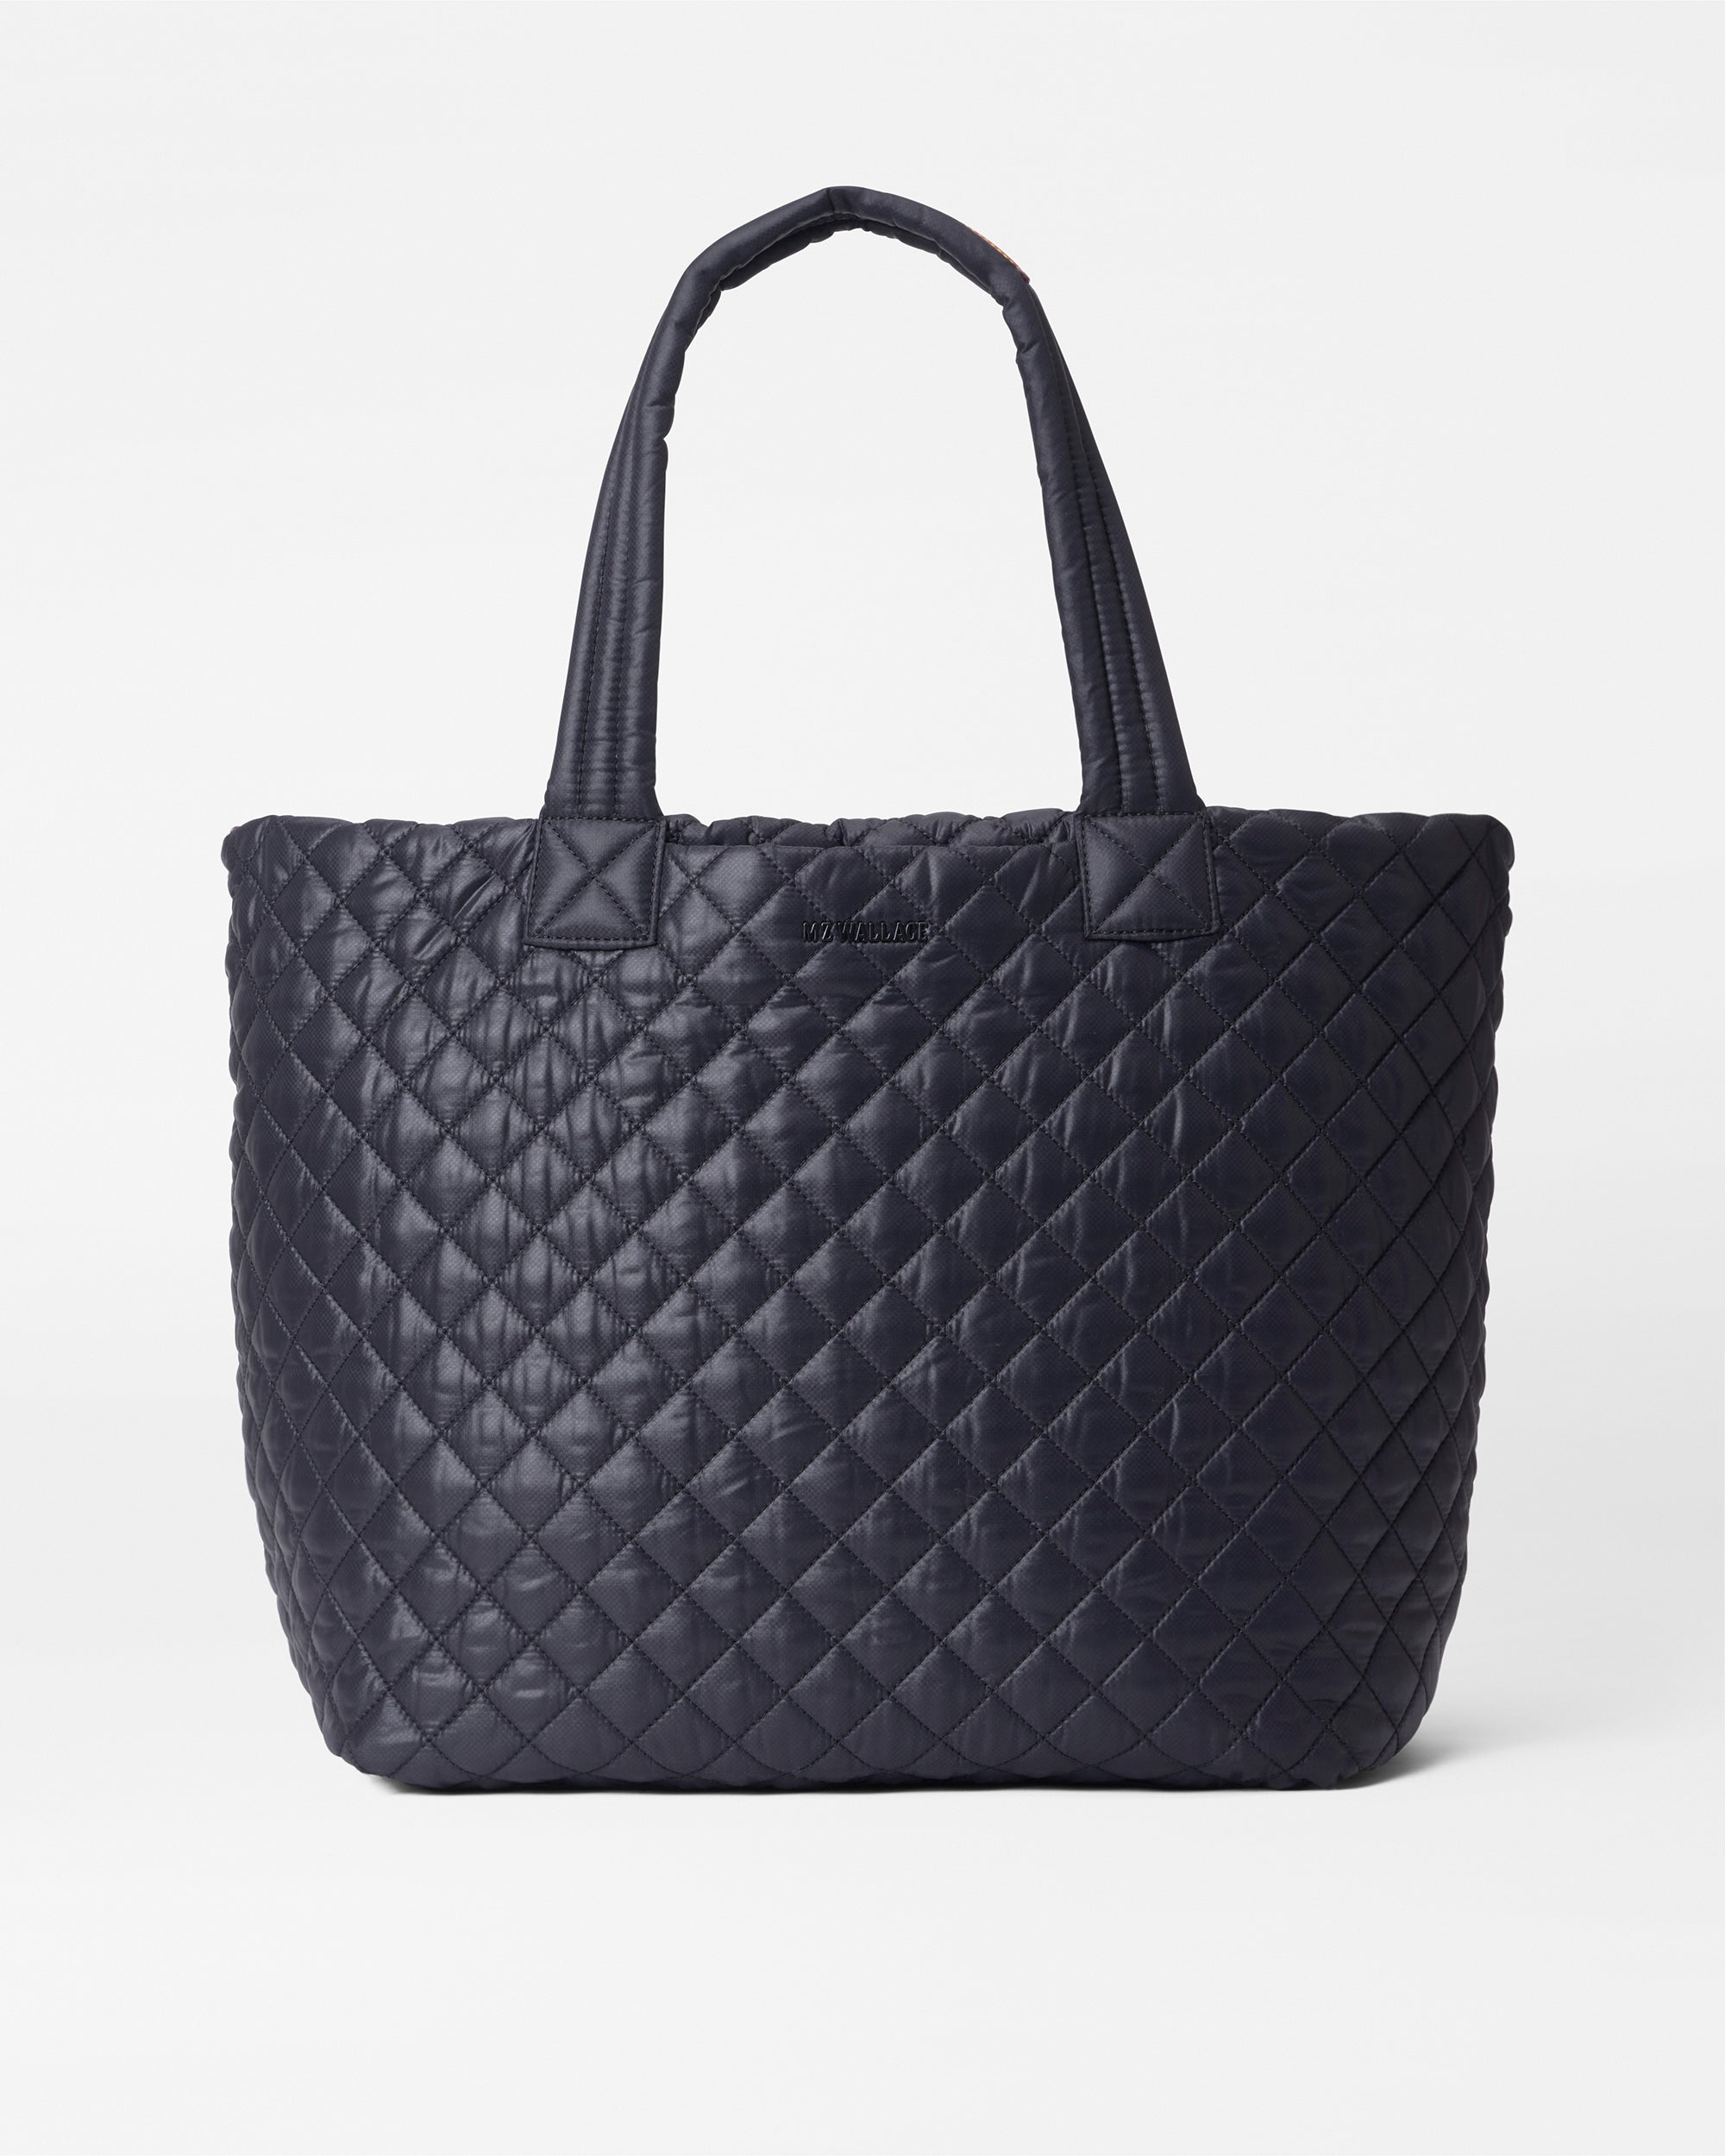 So many fashion girls own this supersized quilted shopping bag that fits all